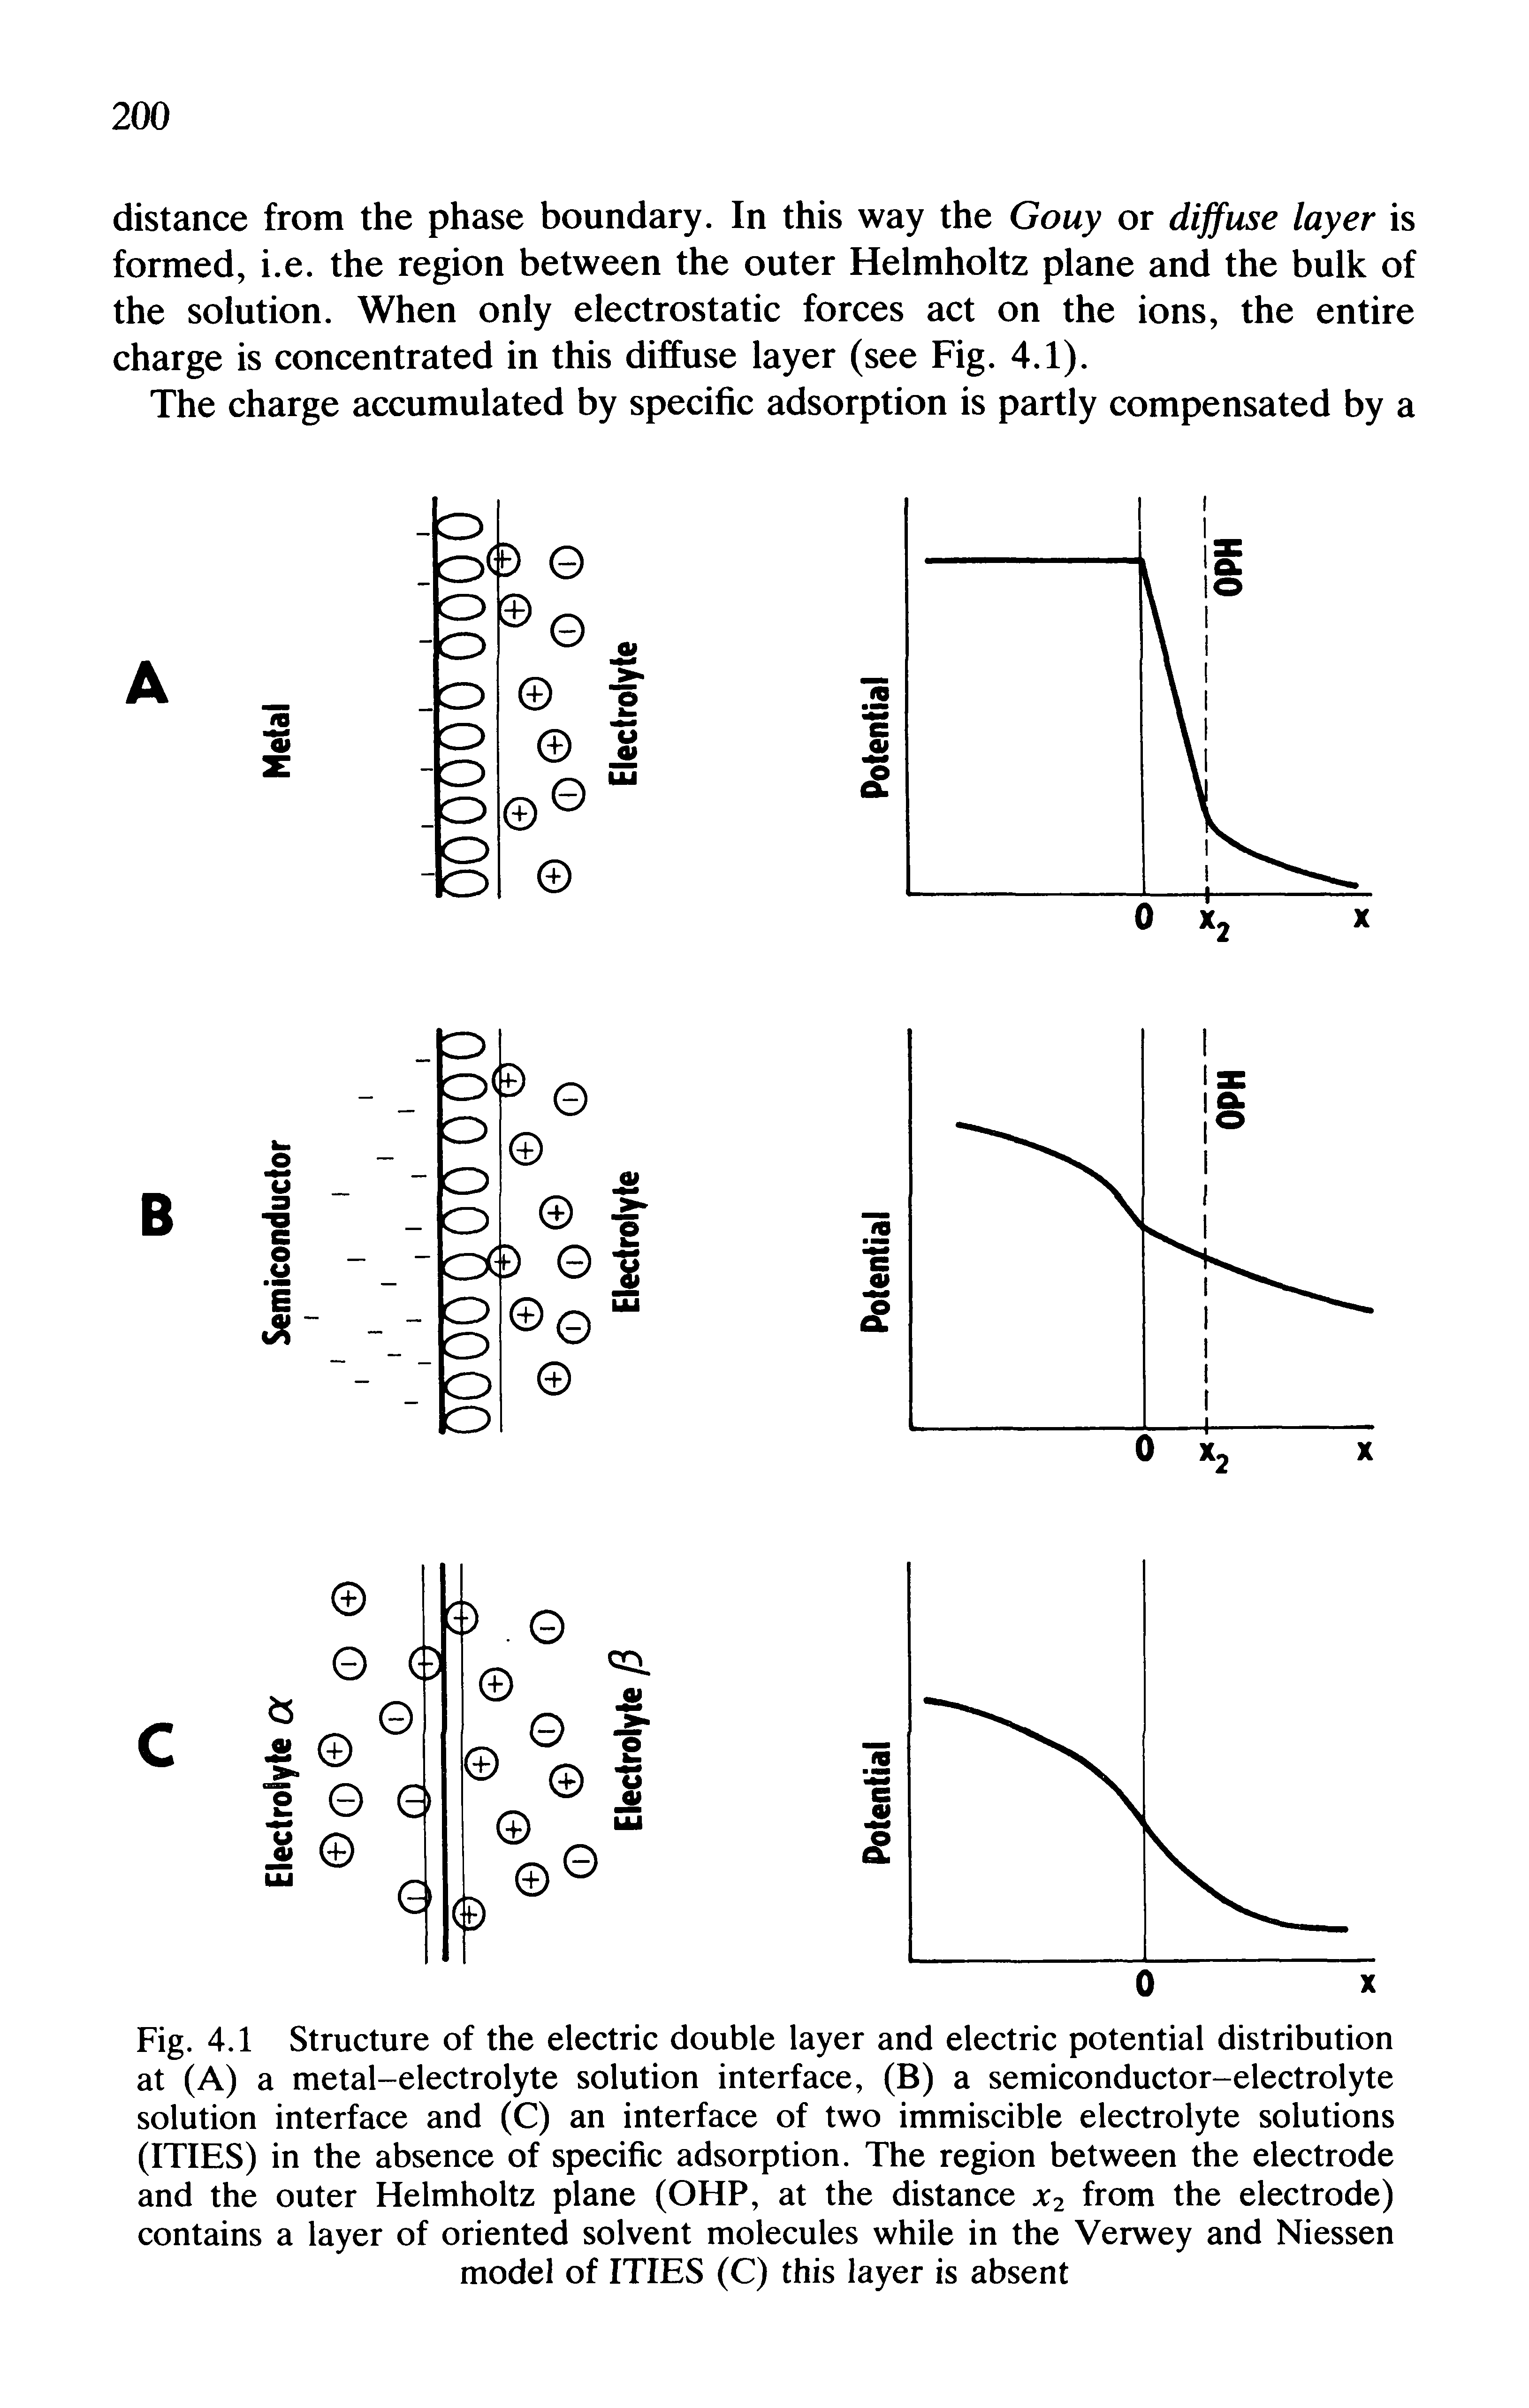 Fig. 4.1 Structure of the electric double layer and electric potential distribution at (A) a metal-electrolyte solution interface, (B) a semiconductor-electrolyte solution interface and (C) an interface of two immiscible electrolyte solutions (ITIES) in the absence of specific adsorption. The region between the electrode and the outer Helmholtz plane (OHP, at the distance jc2 from the electrode) contains a layer of oriented solvent molecules while in the Verwey and Niessen model of ITIES (C) this layer is absent...